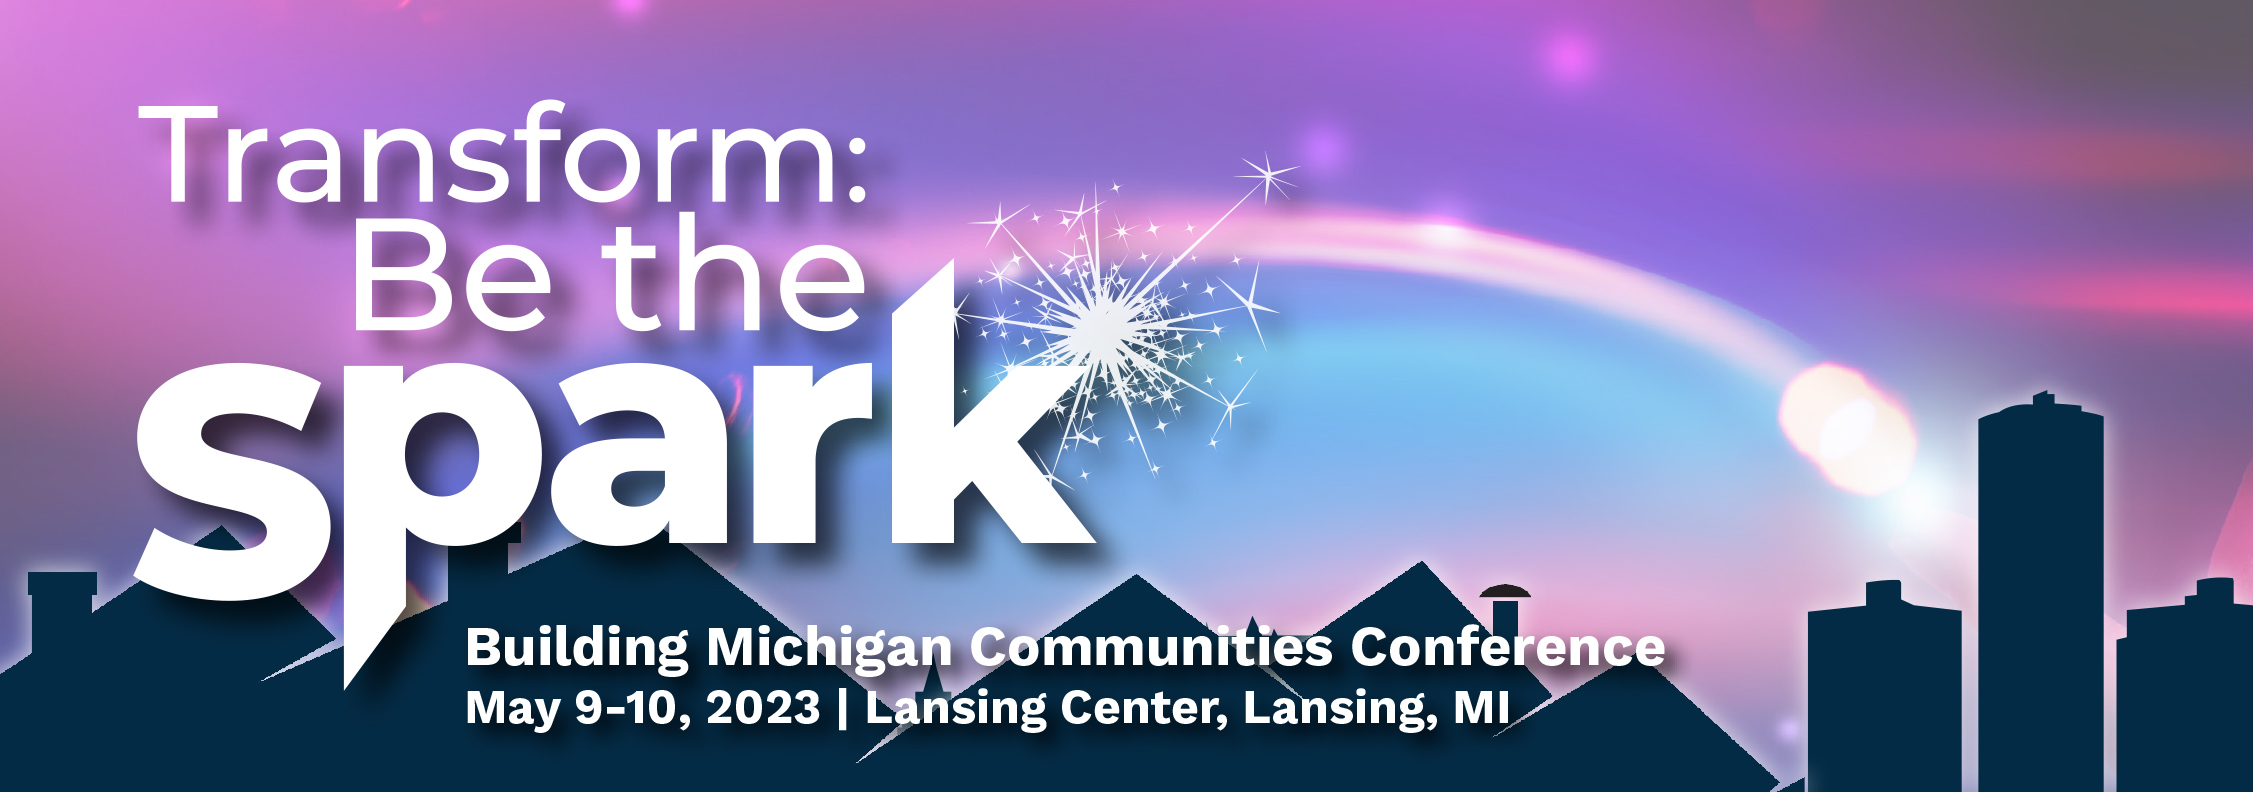 Transform Be The Spark Conference theme 2023 header